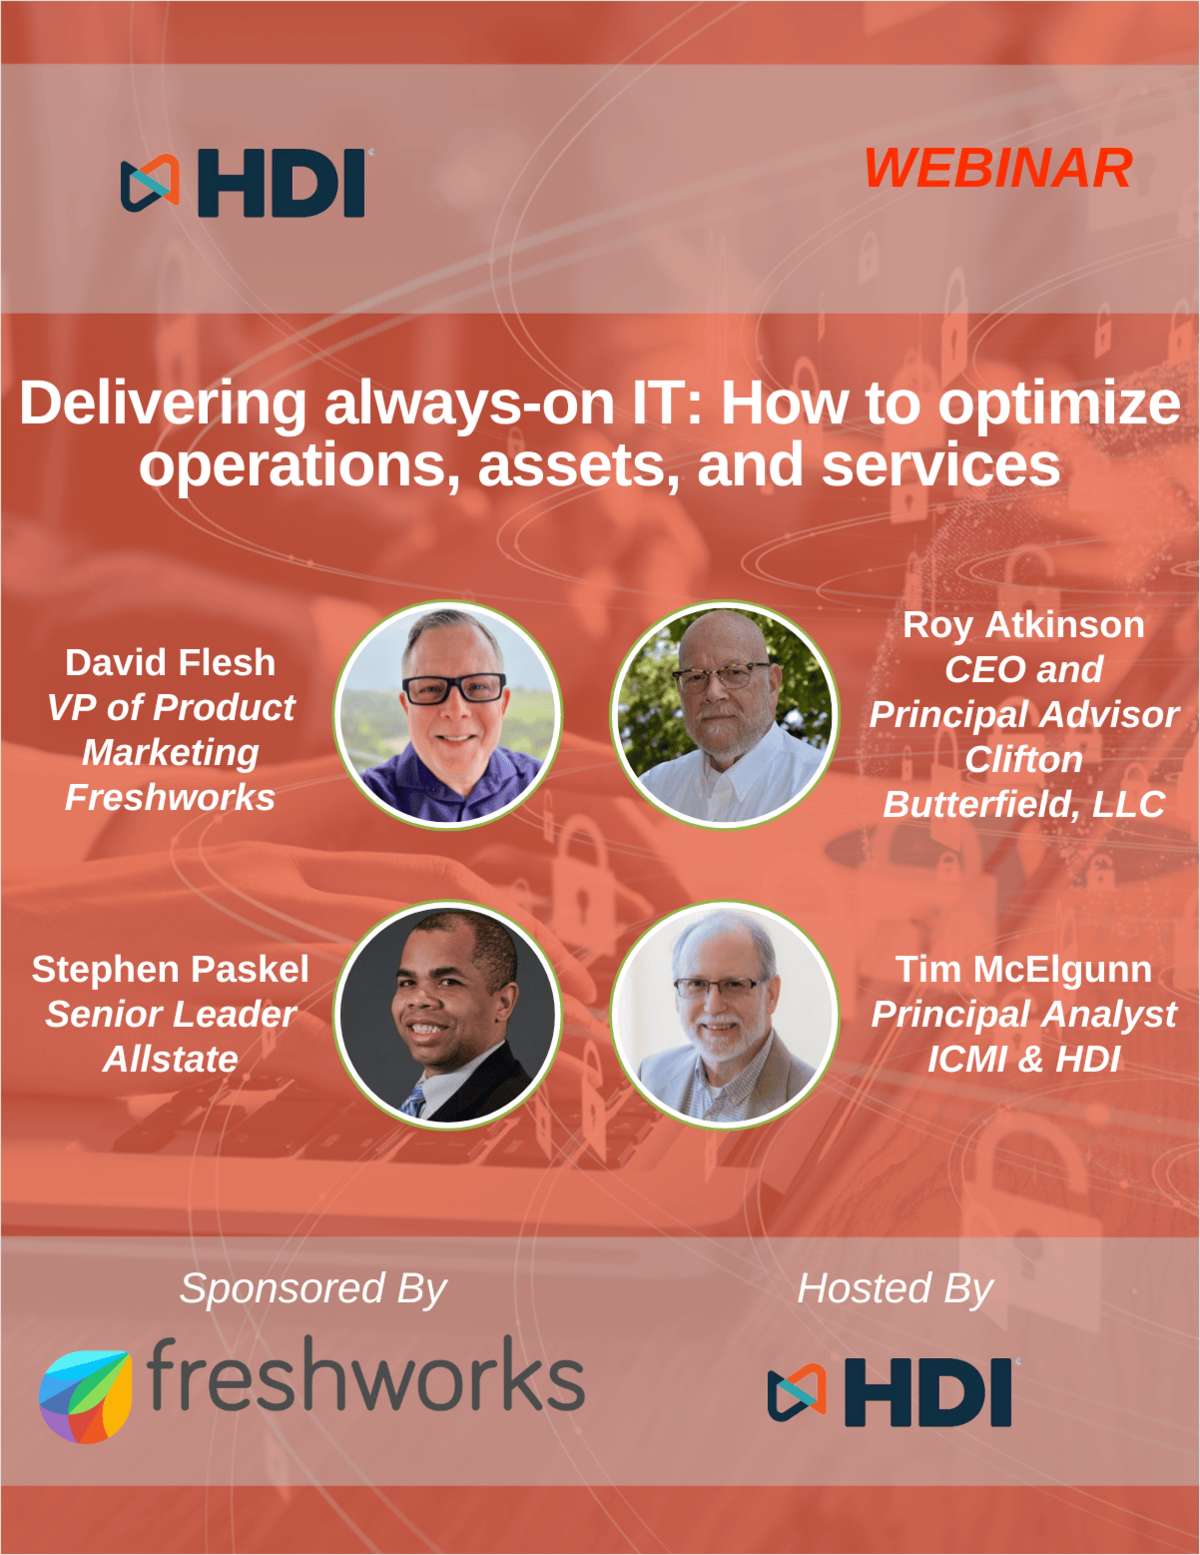 Delivering always-on IT: How to optimize operations, assets, and services